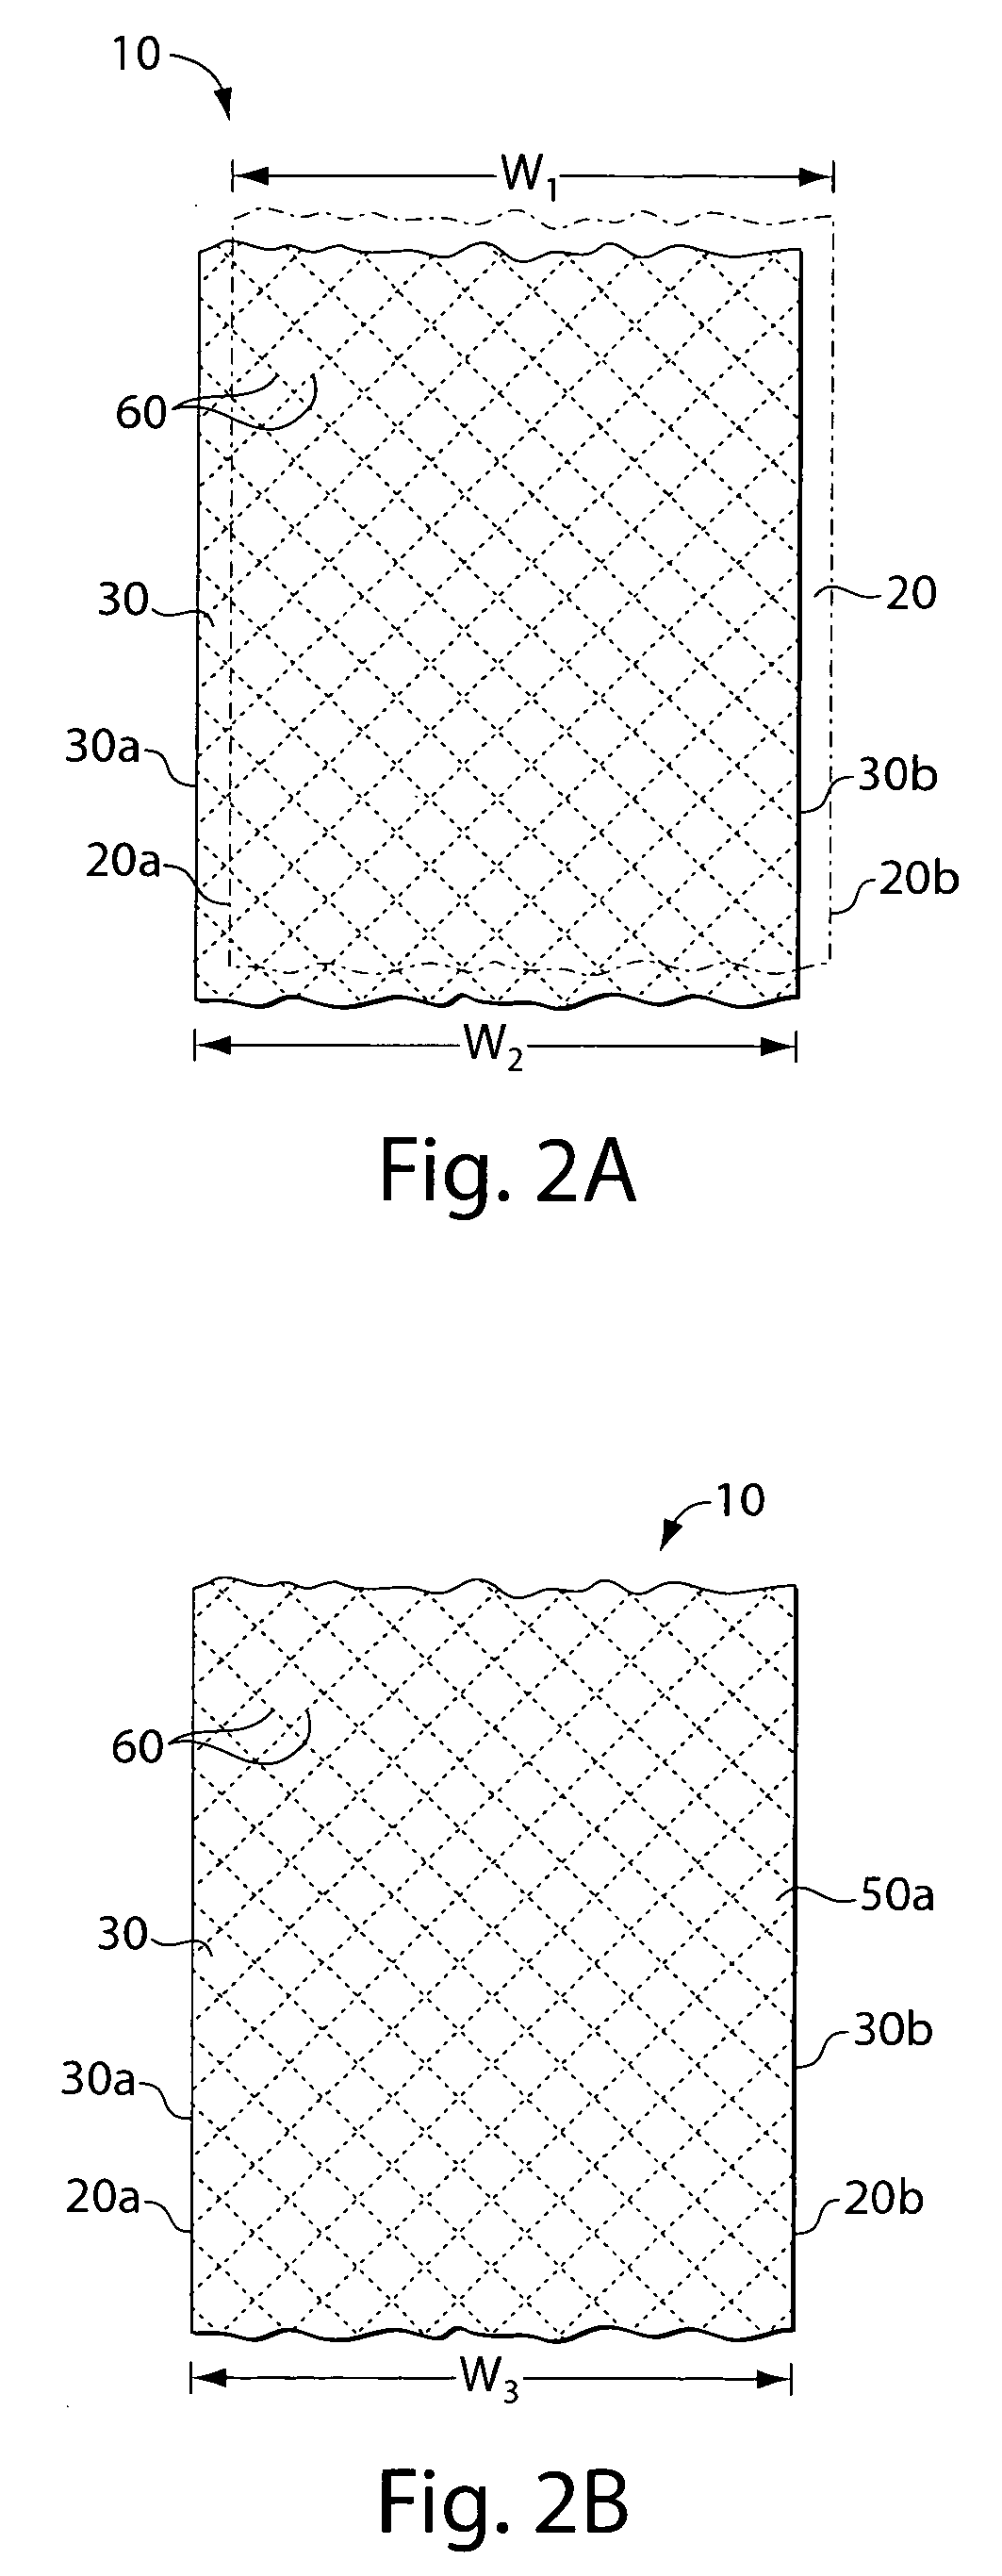 Water blocking cable tape and methods for making same